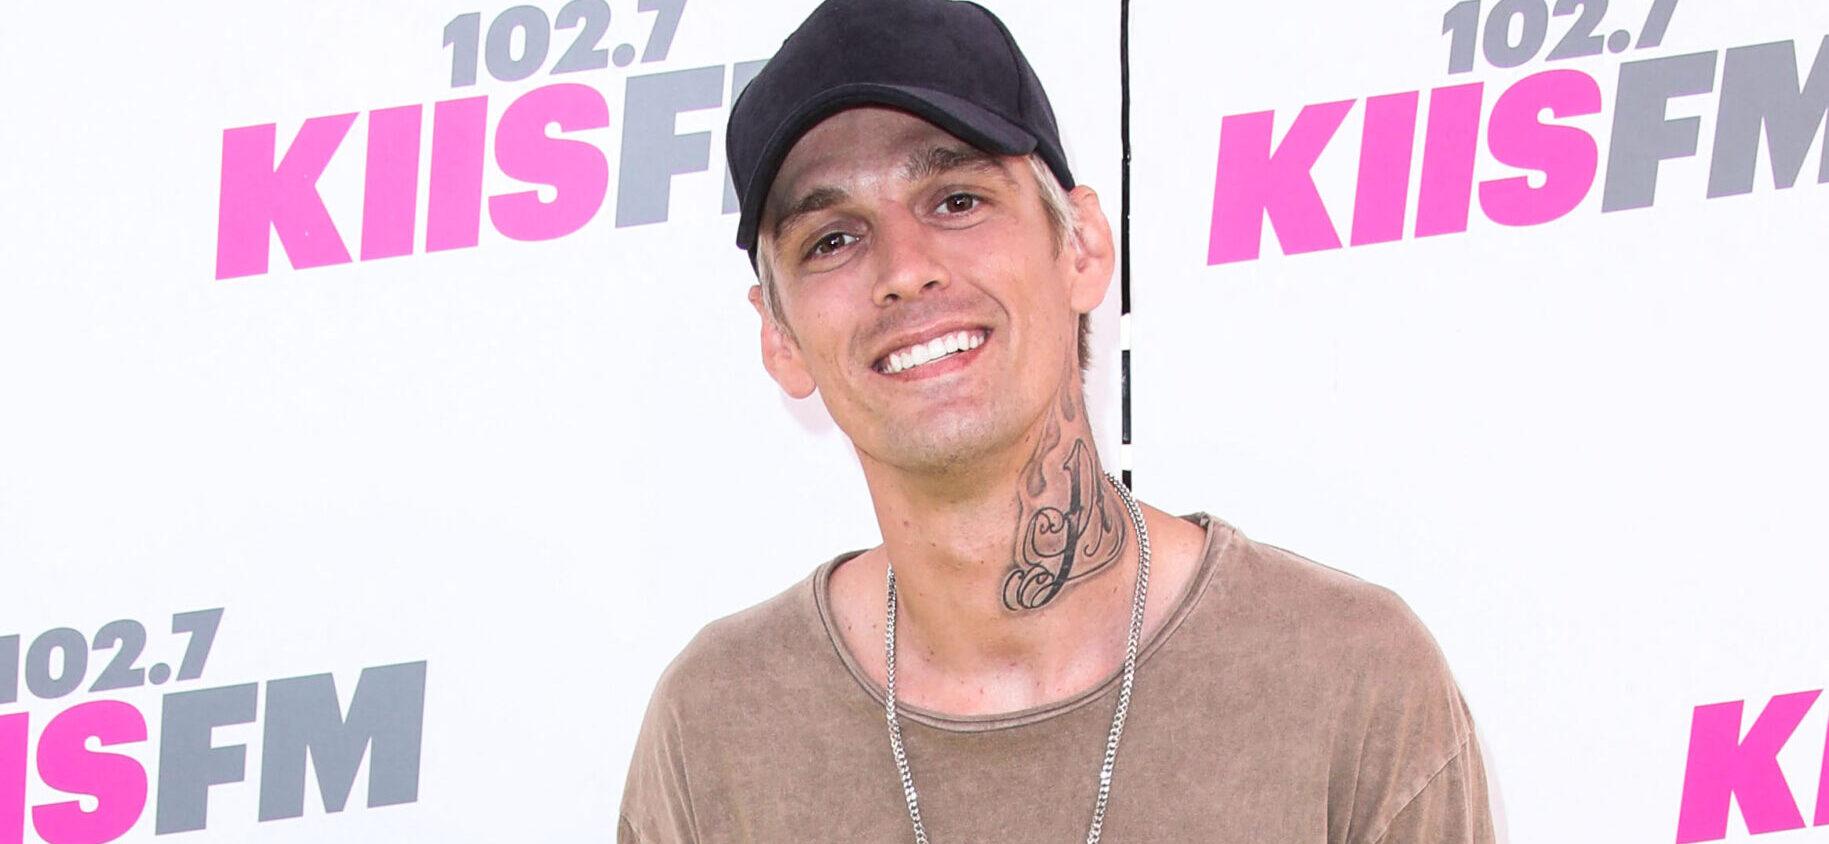 Singer Aaron Carter’s Burial Headstone, Final Resting Place Revealed